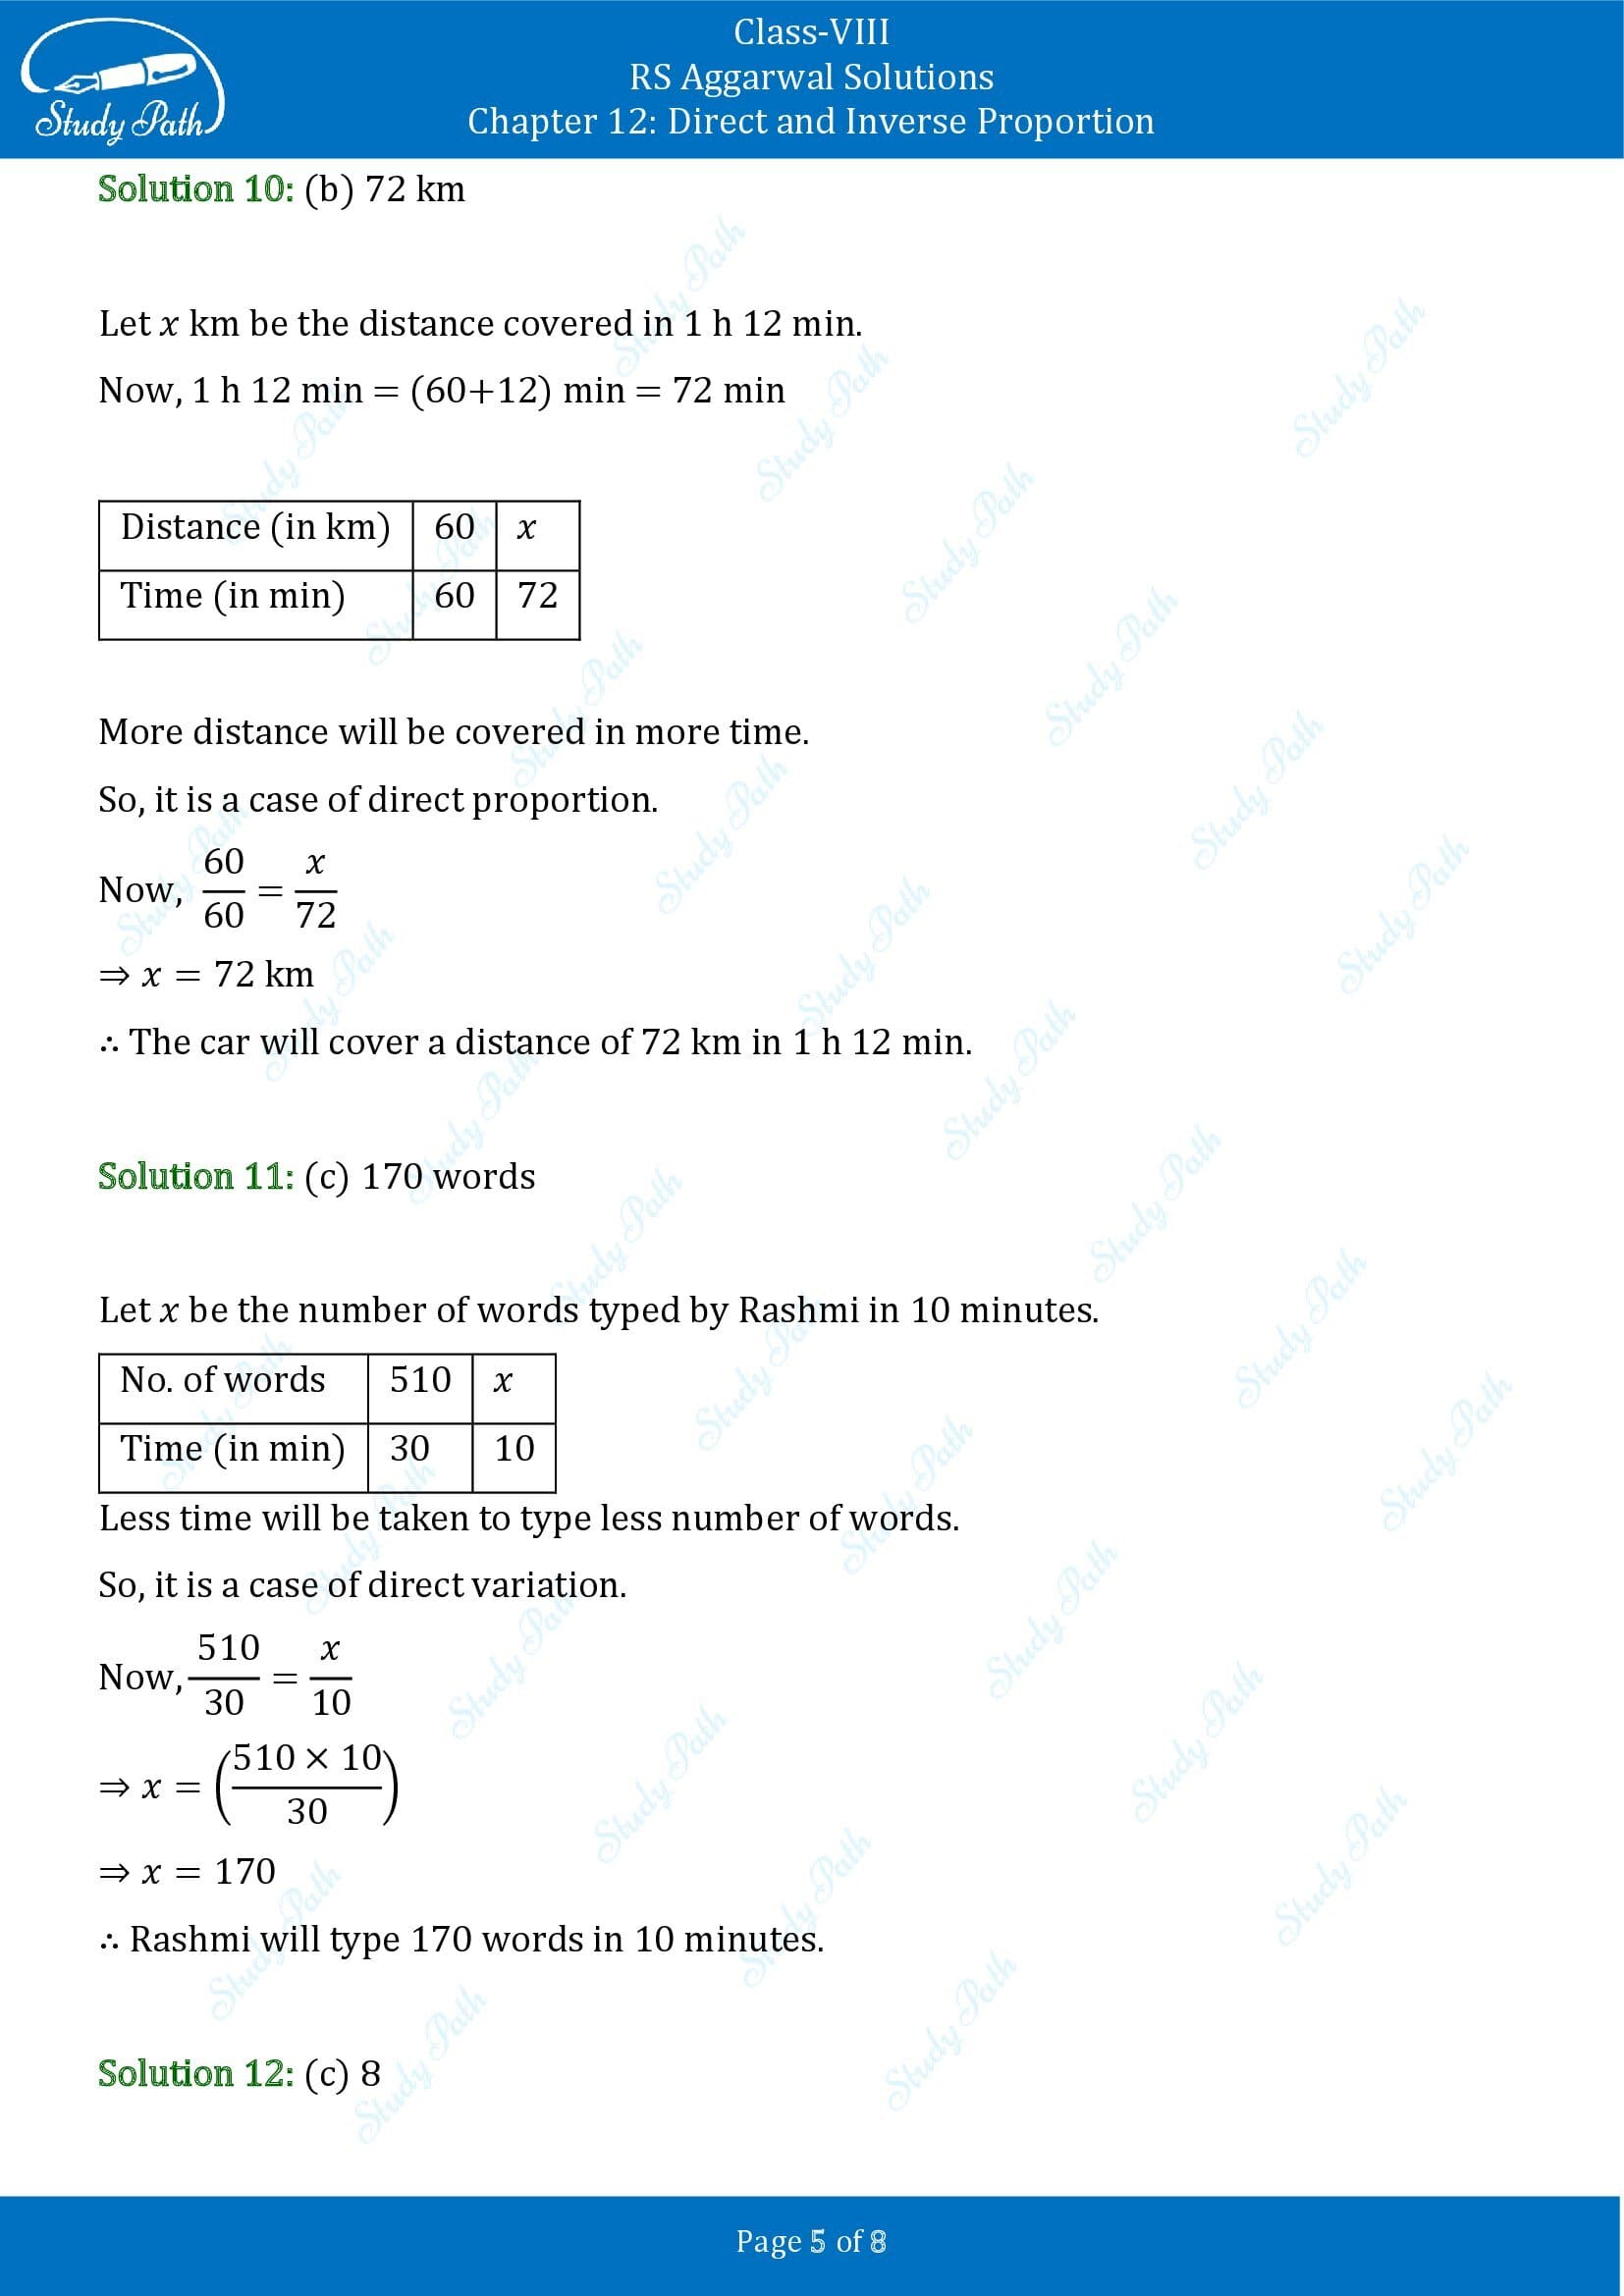 RS Aggarwal Solutions Class 8 Chapter 12 Direct and Inverse Proportion Test Paper 00005